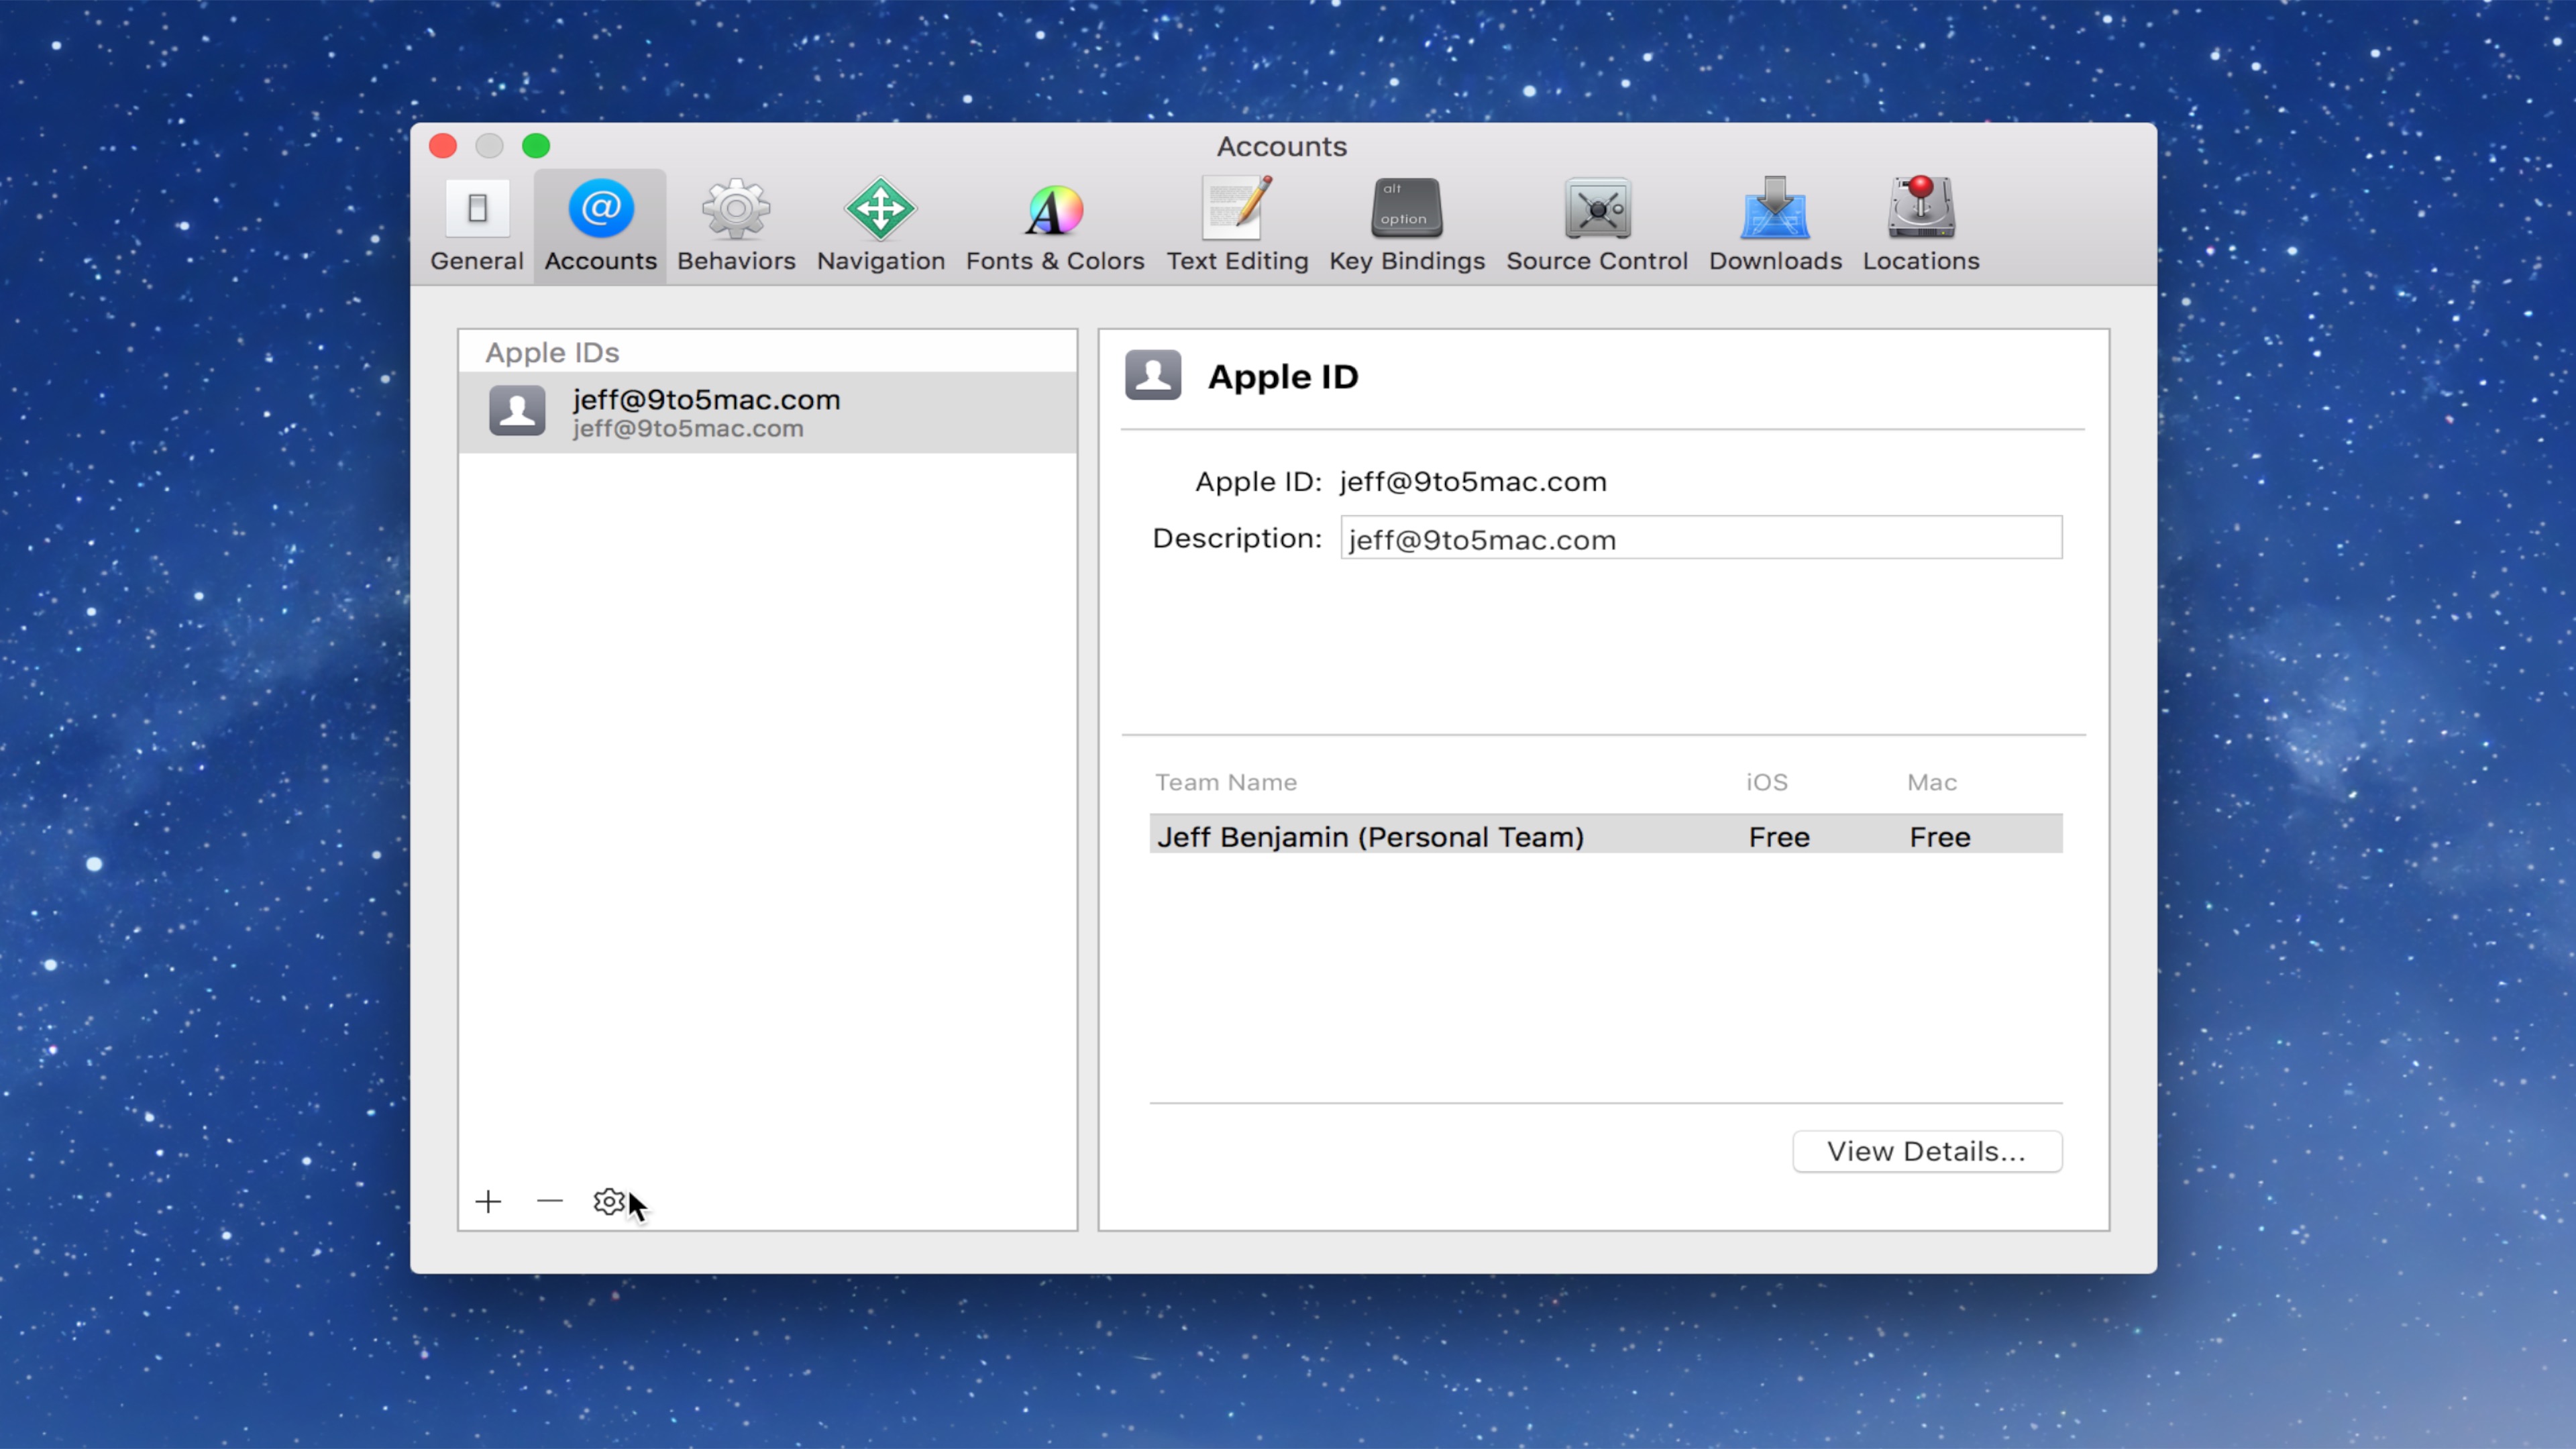  A screenshot of the Accounts section of Xcode, which is used to manage Apple accounts and certificates for signing and installing apps on Apple devices.